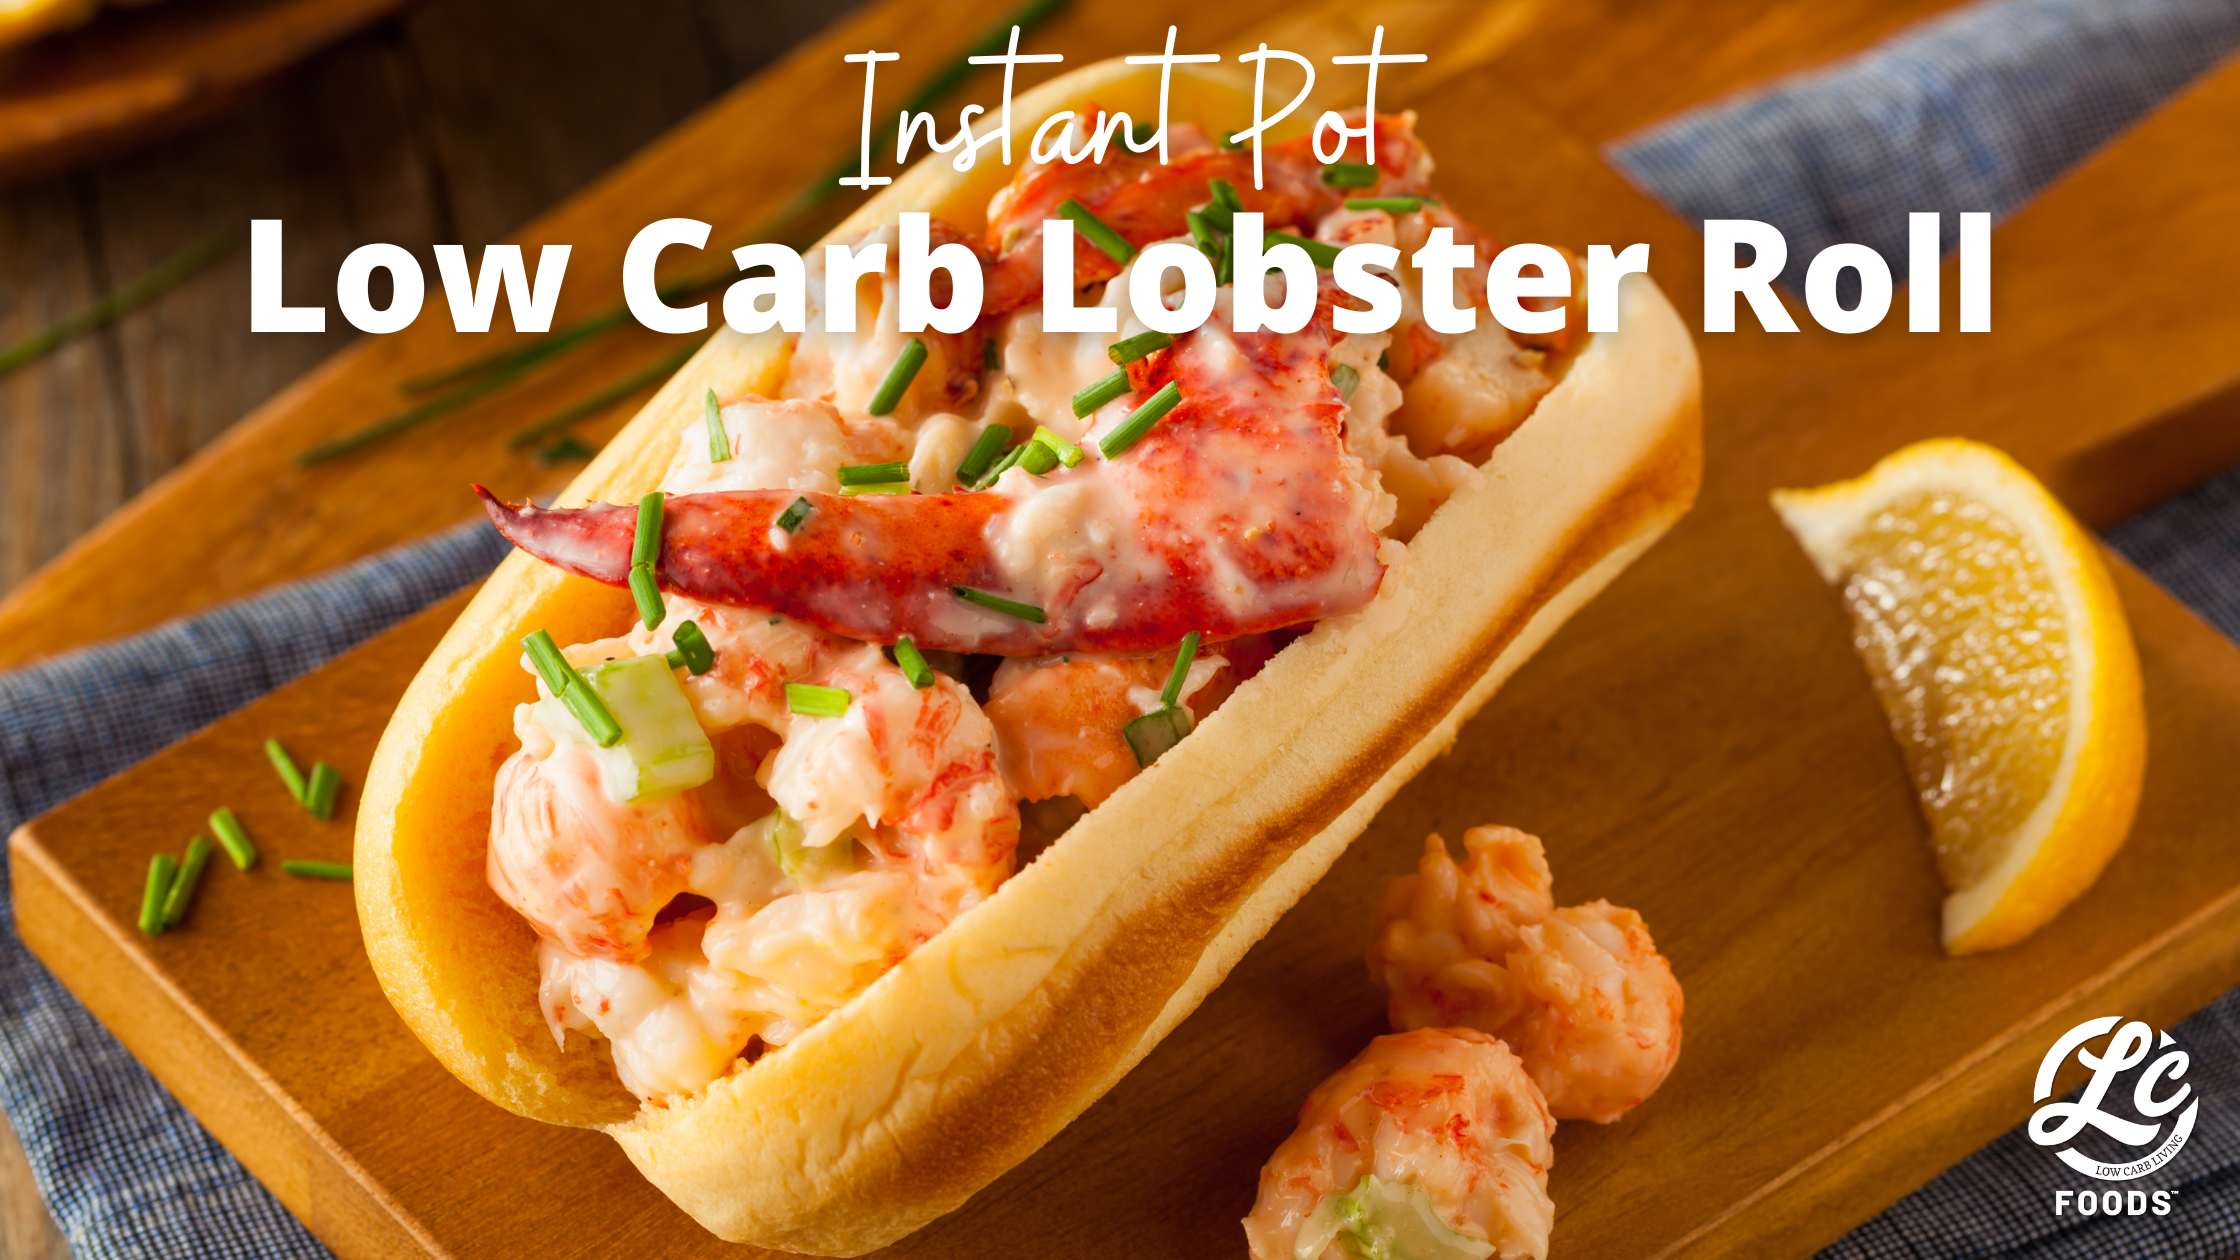 Thumbnail for Instant Pot Low Carb Lobster Rolls